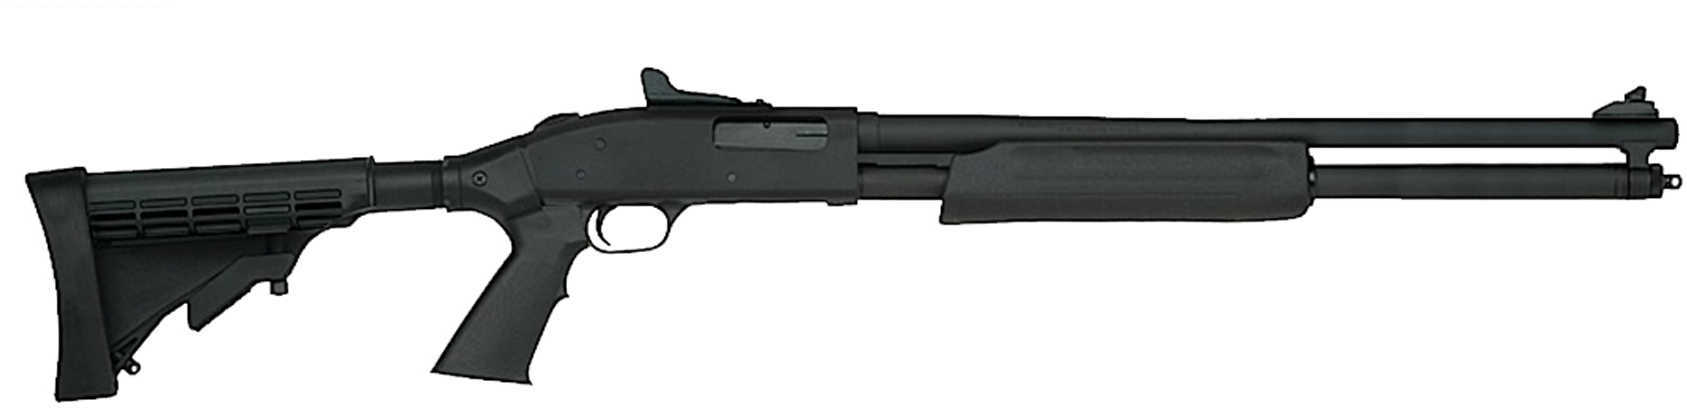 Mossberg 500 Special Purpose 20 Gauge Shotgun 20" Ghost Ring Blued/Synthetic 8 Round 54301